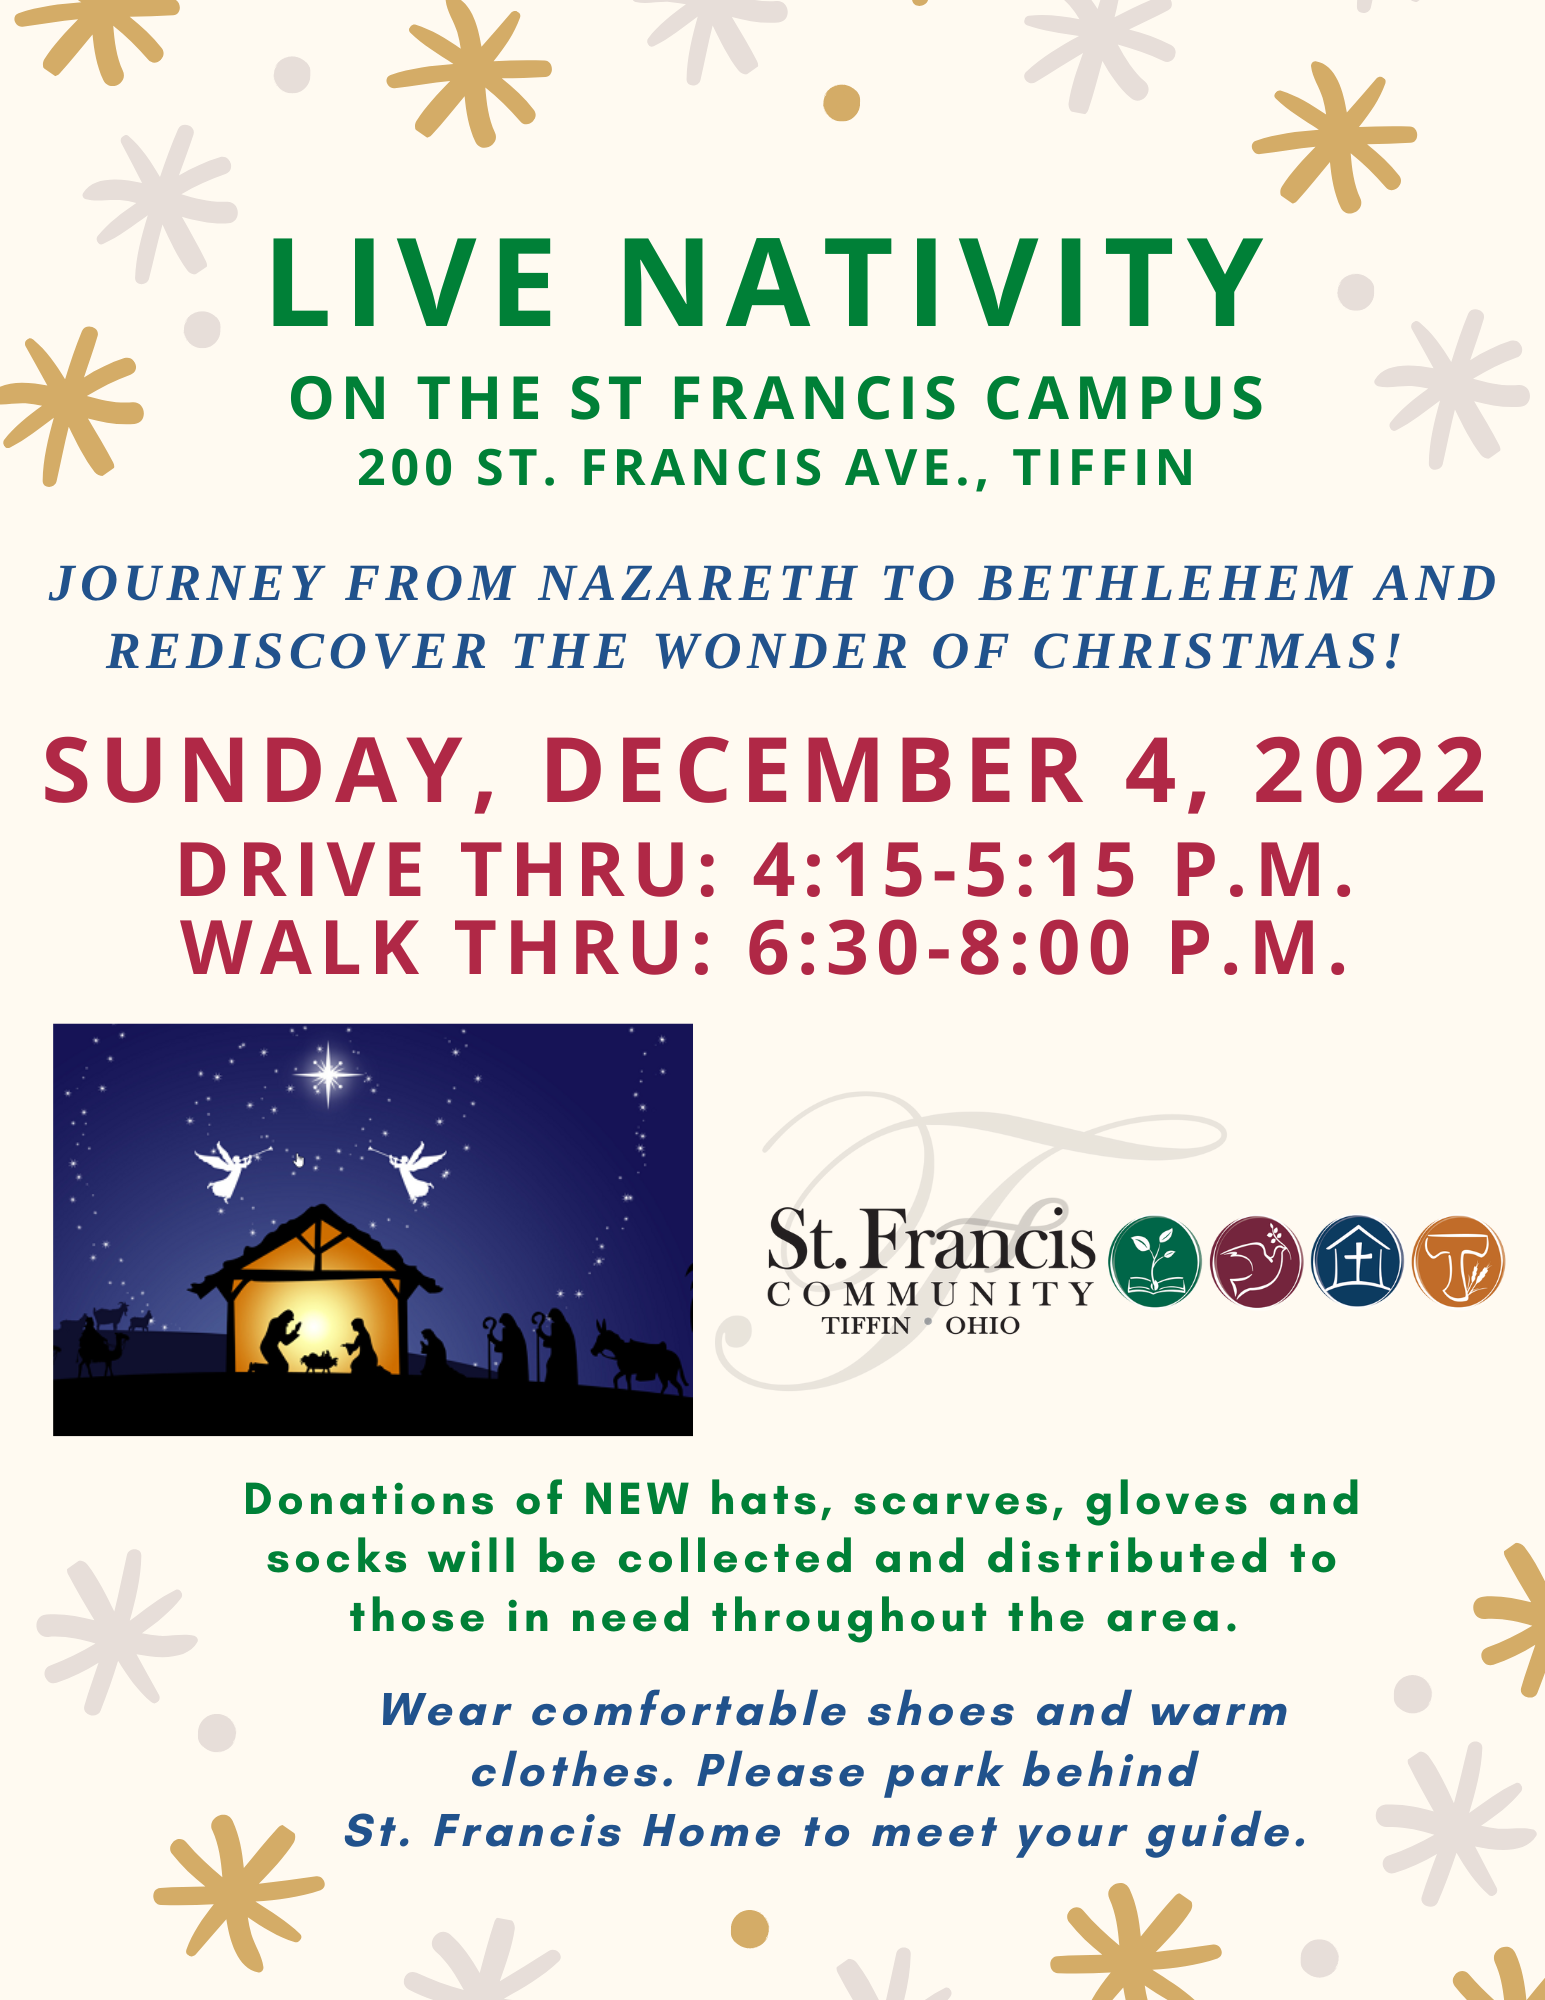 Live Nativity on the St. Francis Campus